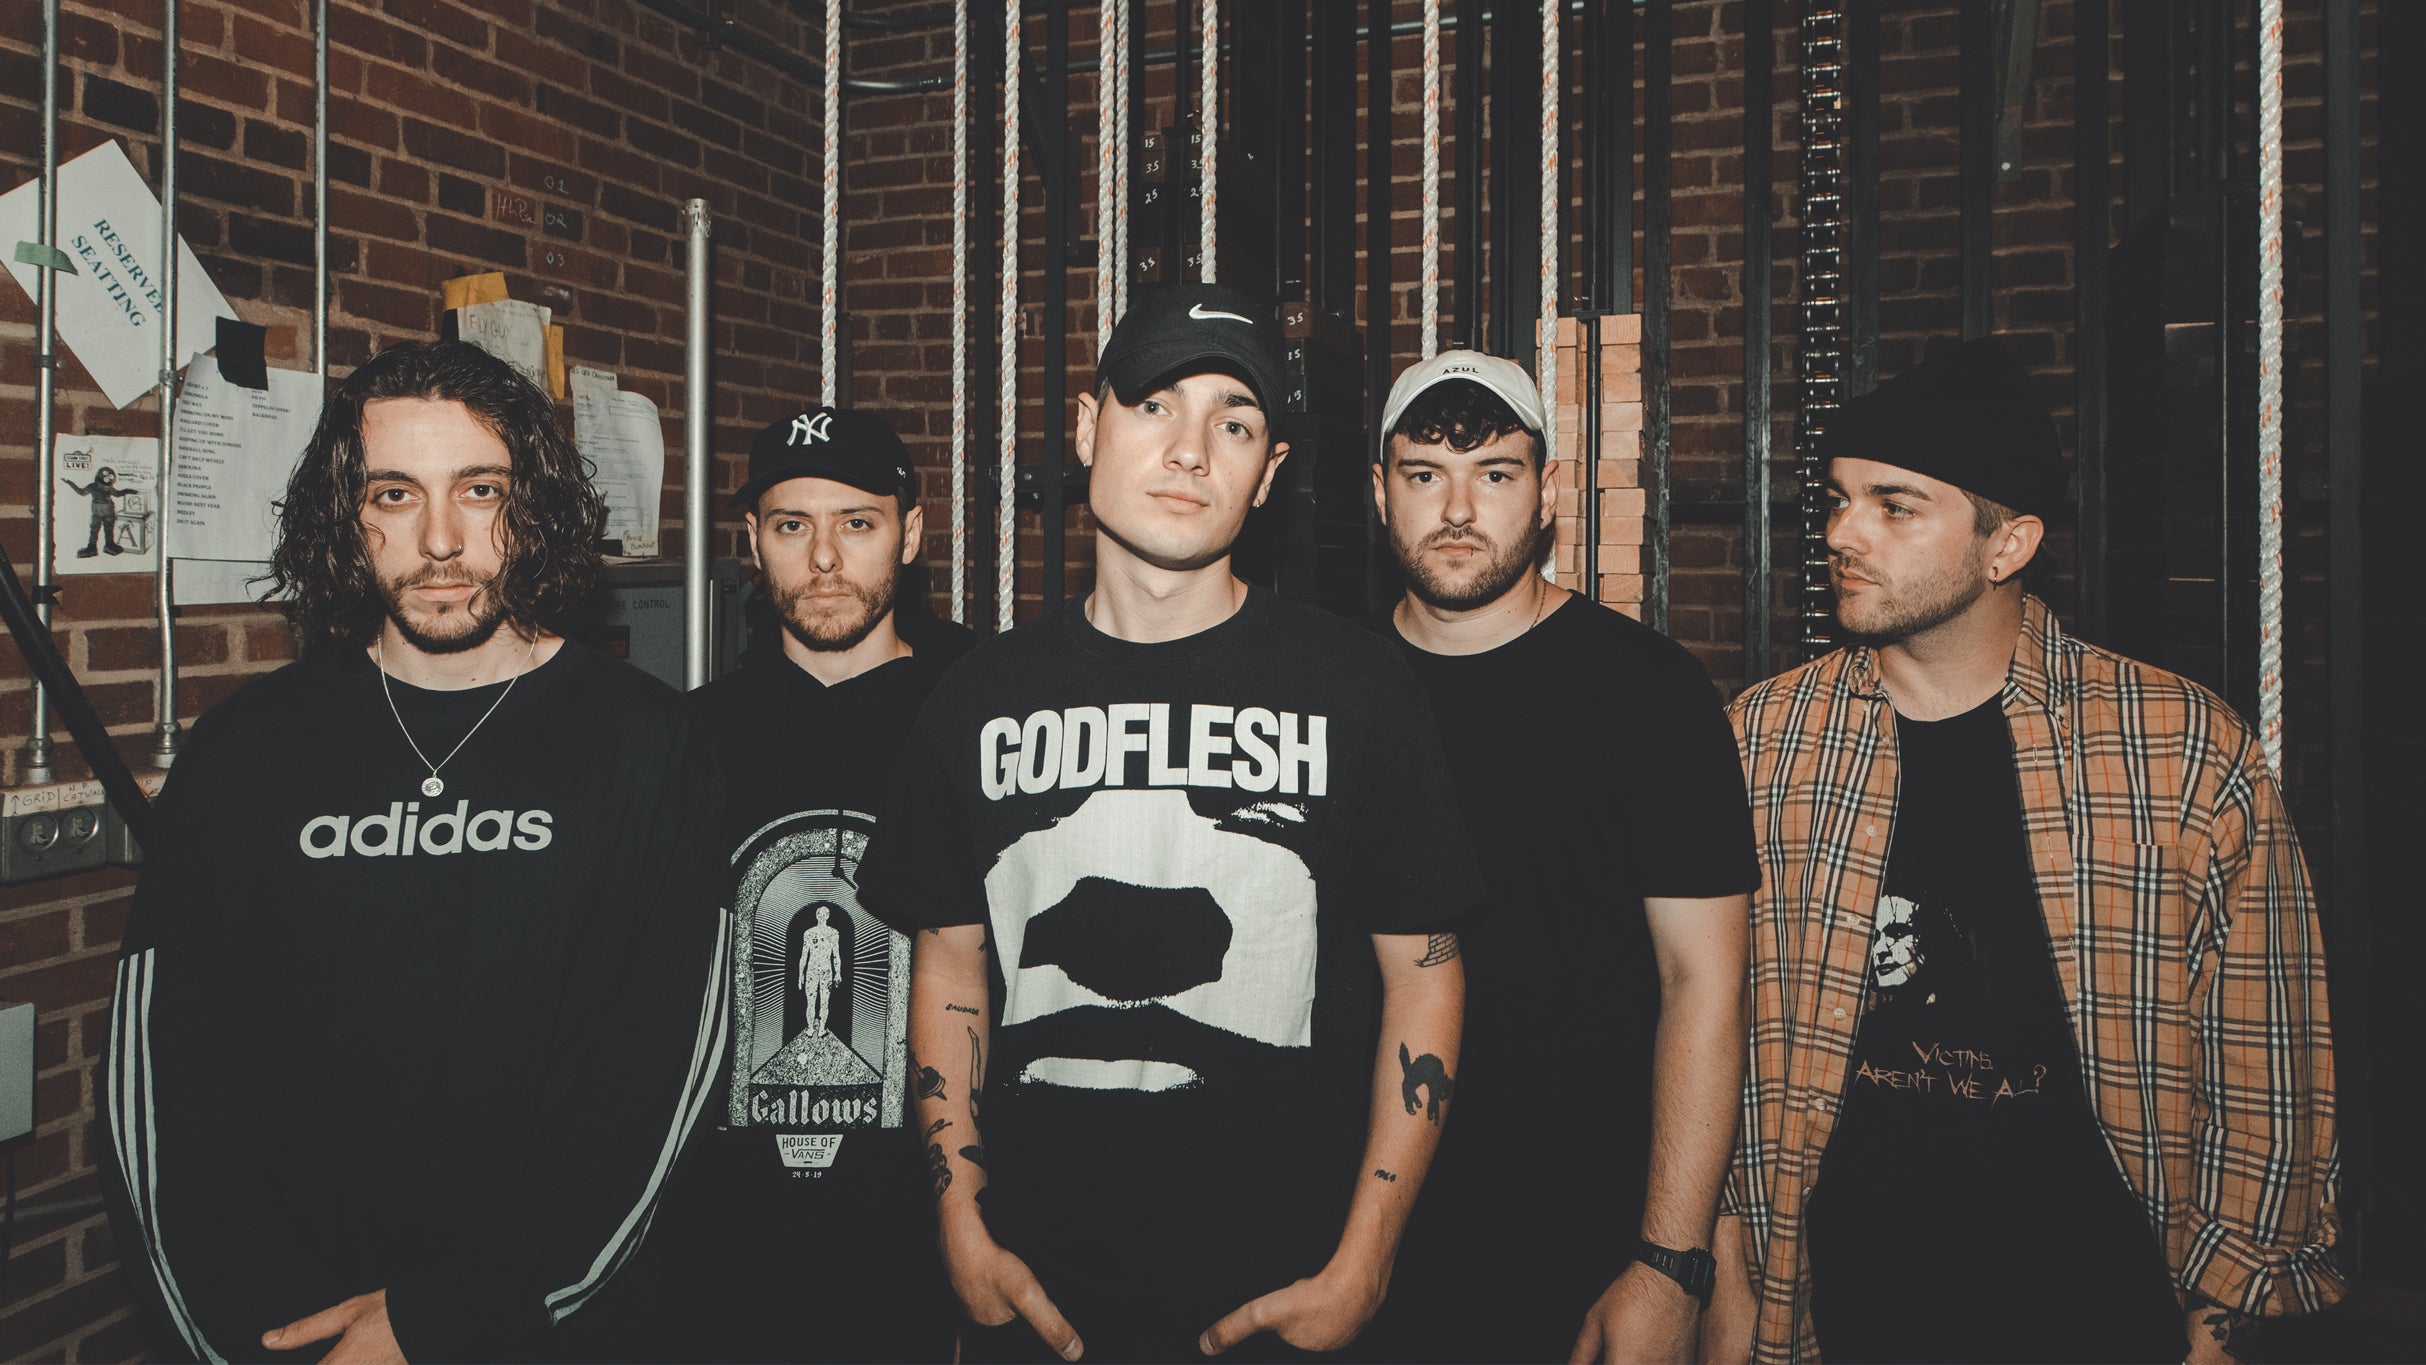 Boston Manor in Manchester promo photo for Live Nation presale offer code